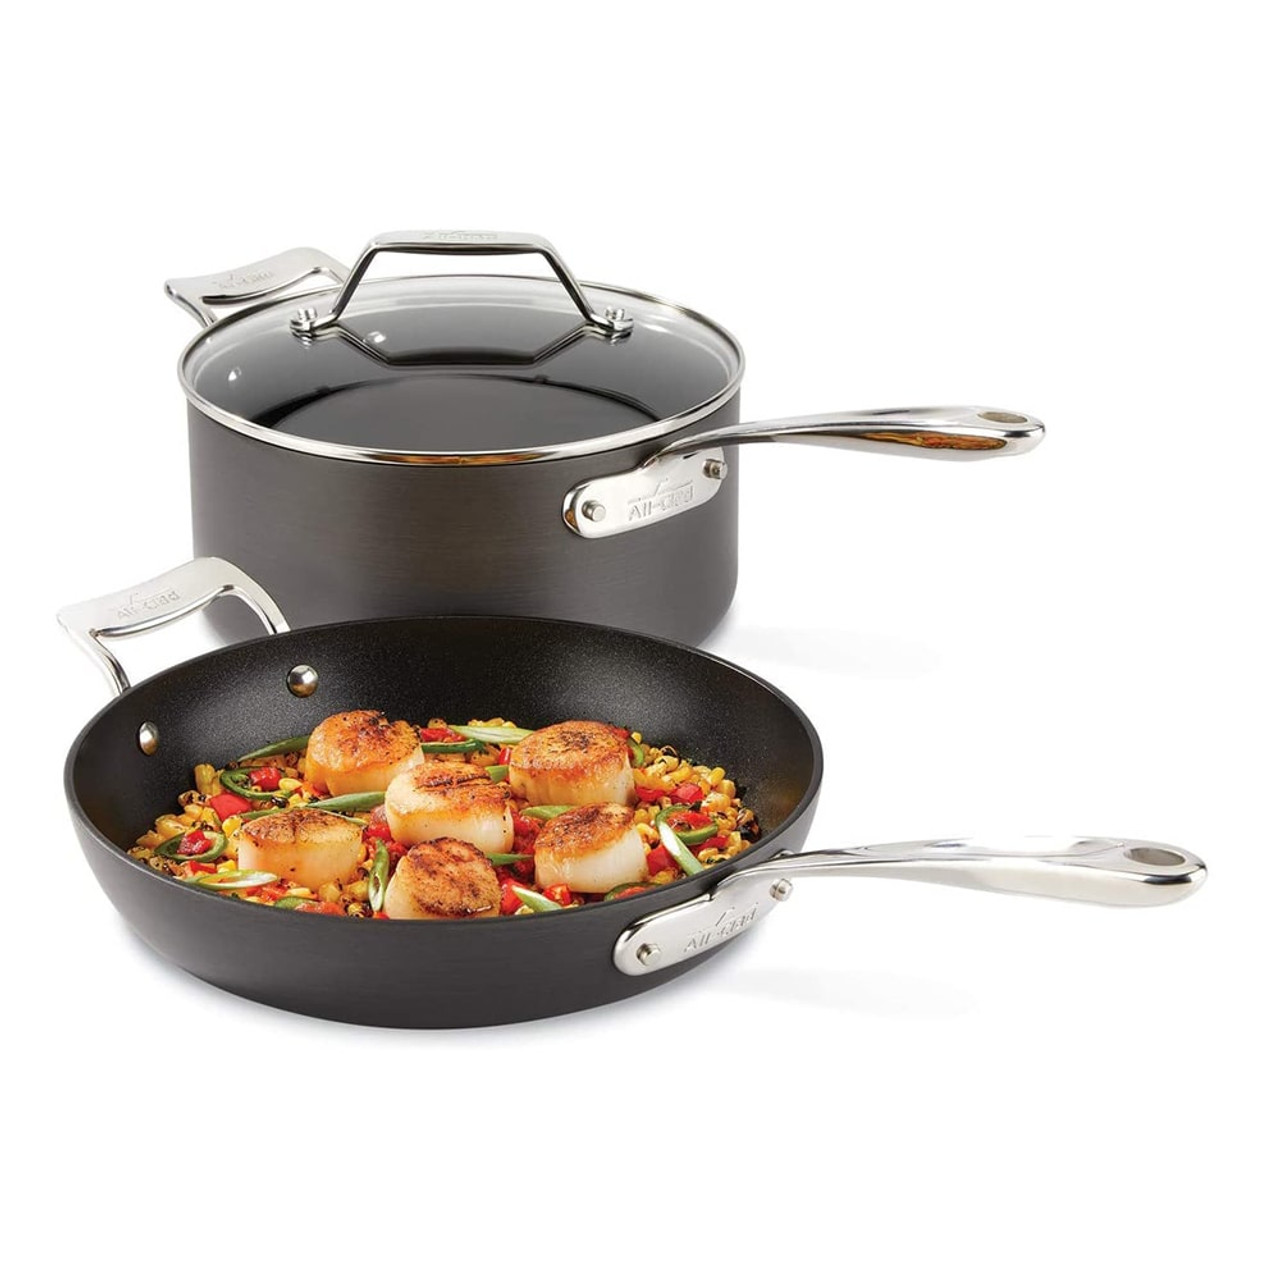 https://cdn11.bigcommerce.com/s-hccytny0od/images/stencil/1280x1280/products/3571/12750/all-clad-essentials-nonstick-large-fry-pan-sauce-pan-set-1__17341.1601383650.jpg?c=2?imbypass=on